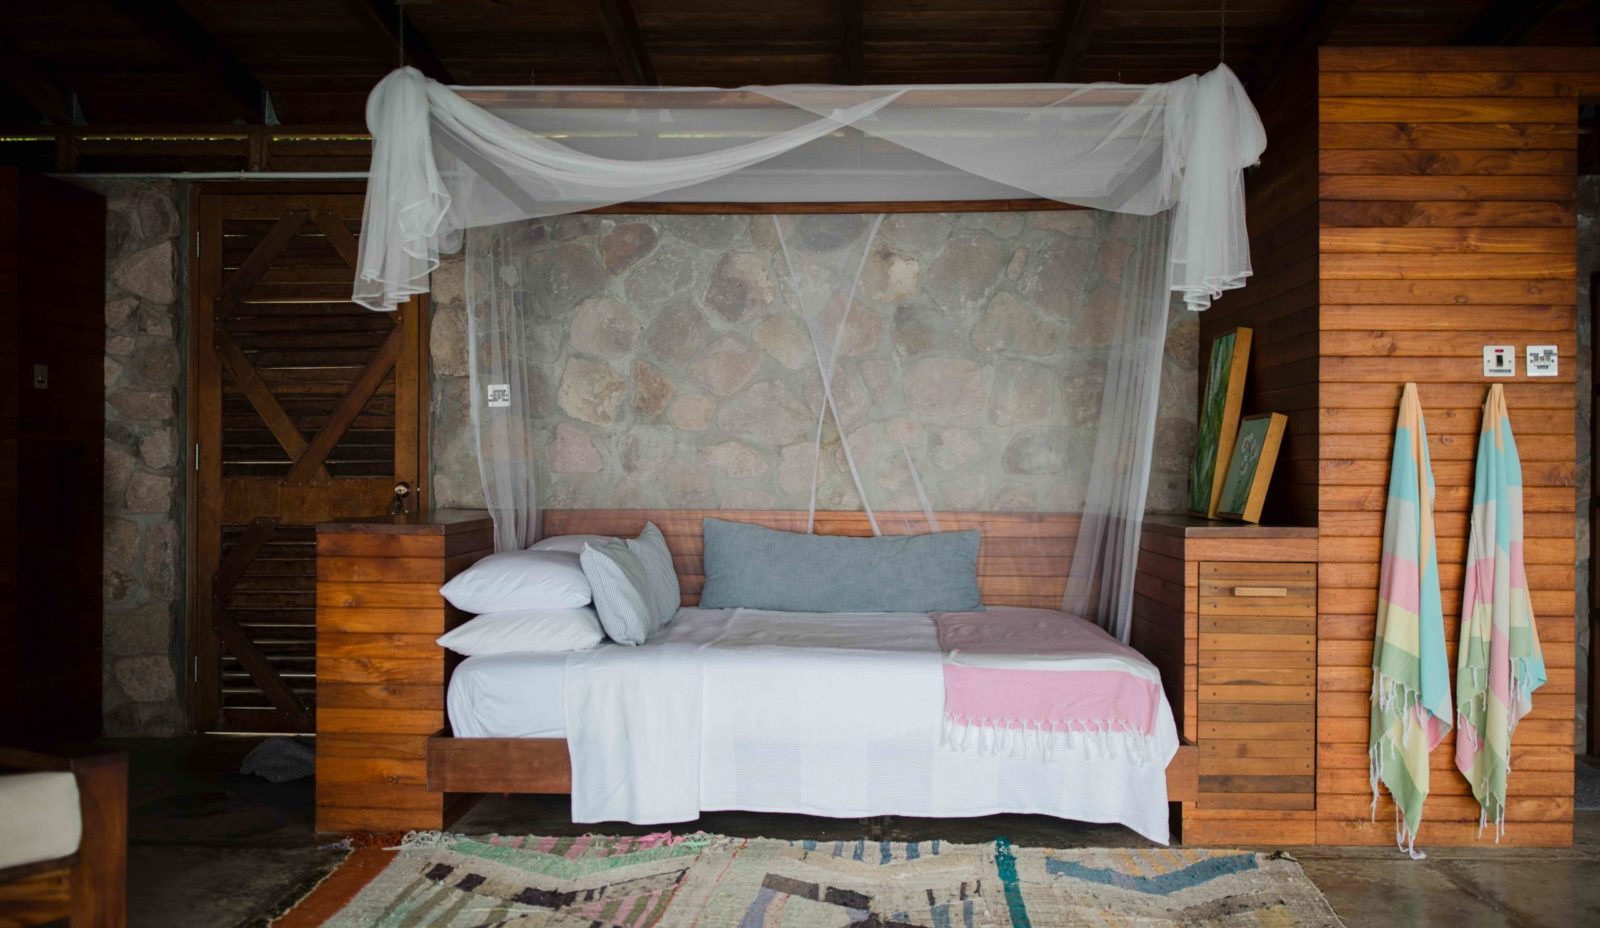 The queen size bed in the Lodge at Cosmos St Lucia has a wooden frame above it holding a mosquito net. There's a pale patterned rug on the floor and two coloured turkich towels hang on the wall. The background shows the stone outwall and wooden pannelling inside